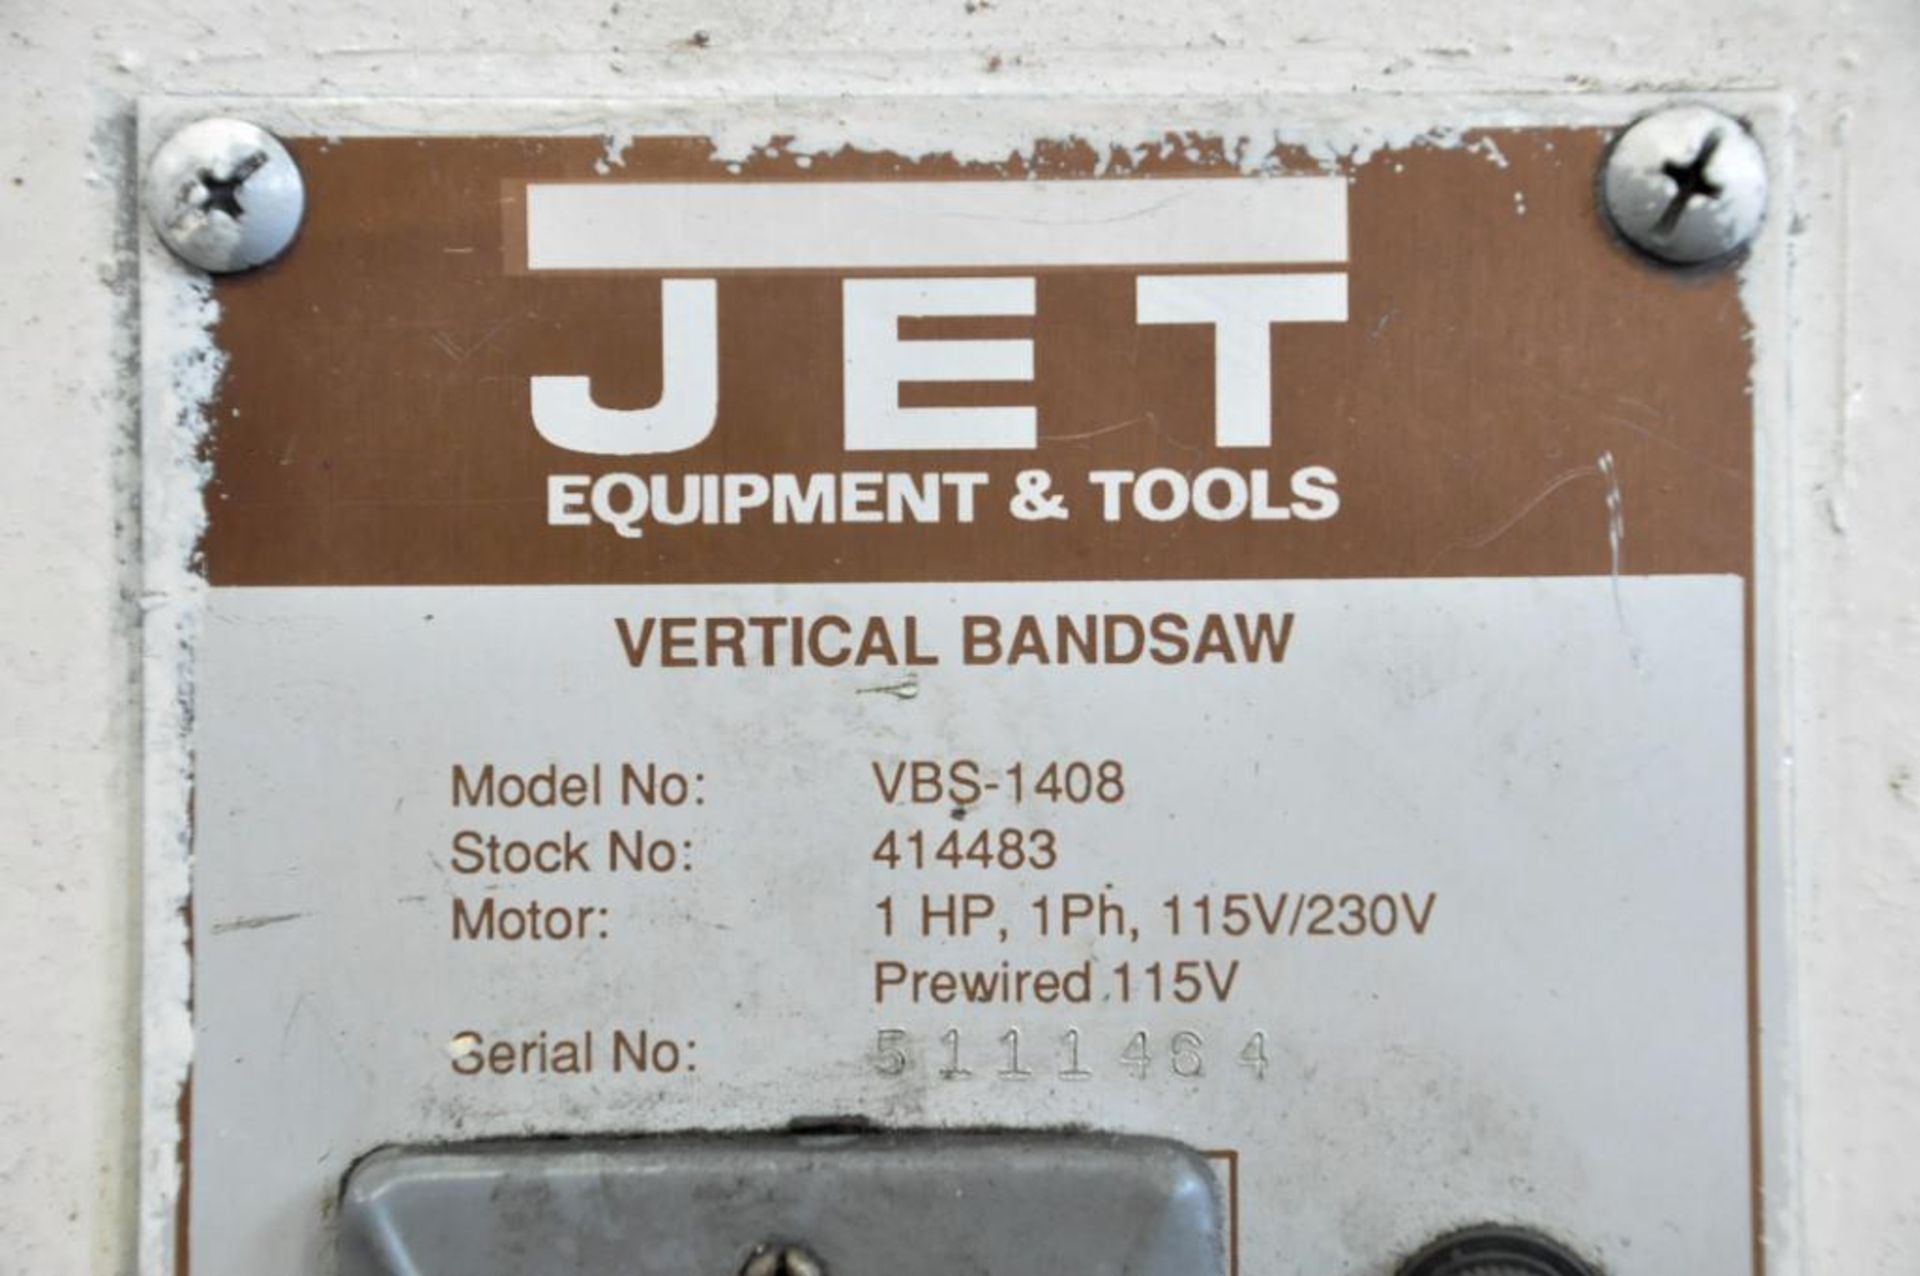 Jet Model VBS-1408, 14" Vertical Contour Metal Cutting Band Saw, S/n 5111484, 19 3/4" x 19 3/4" Work - Image 7 of 7